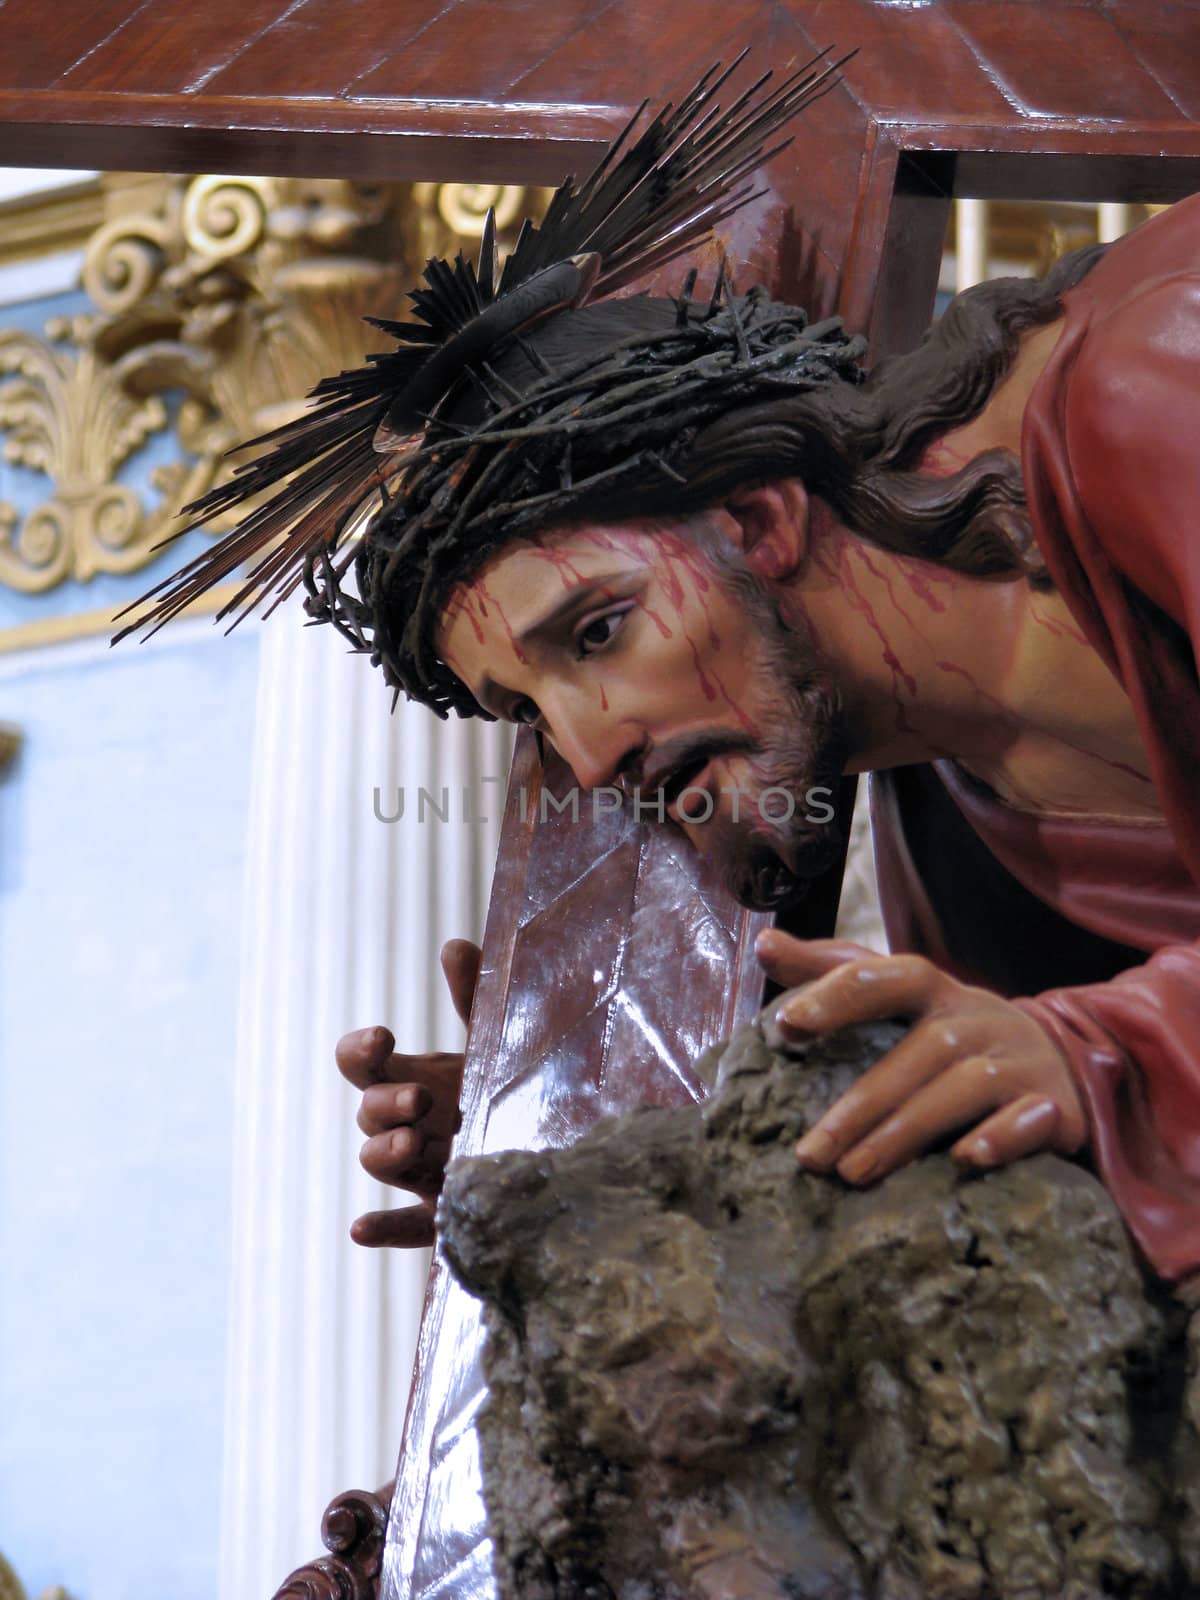 A detail of the statue of Jesus the Redeemer in Mosta, Malta.